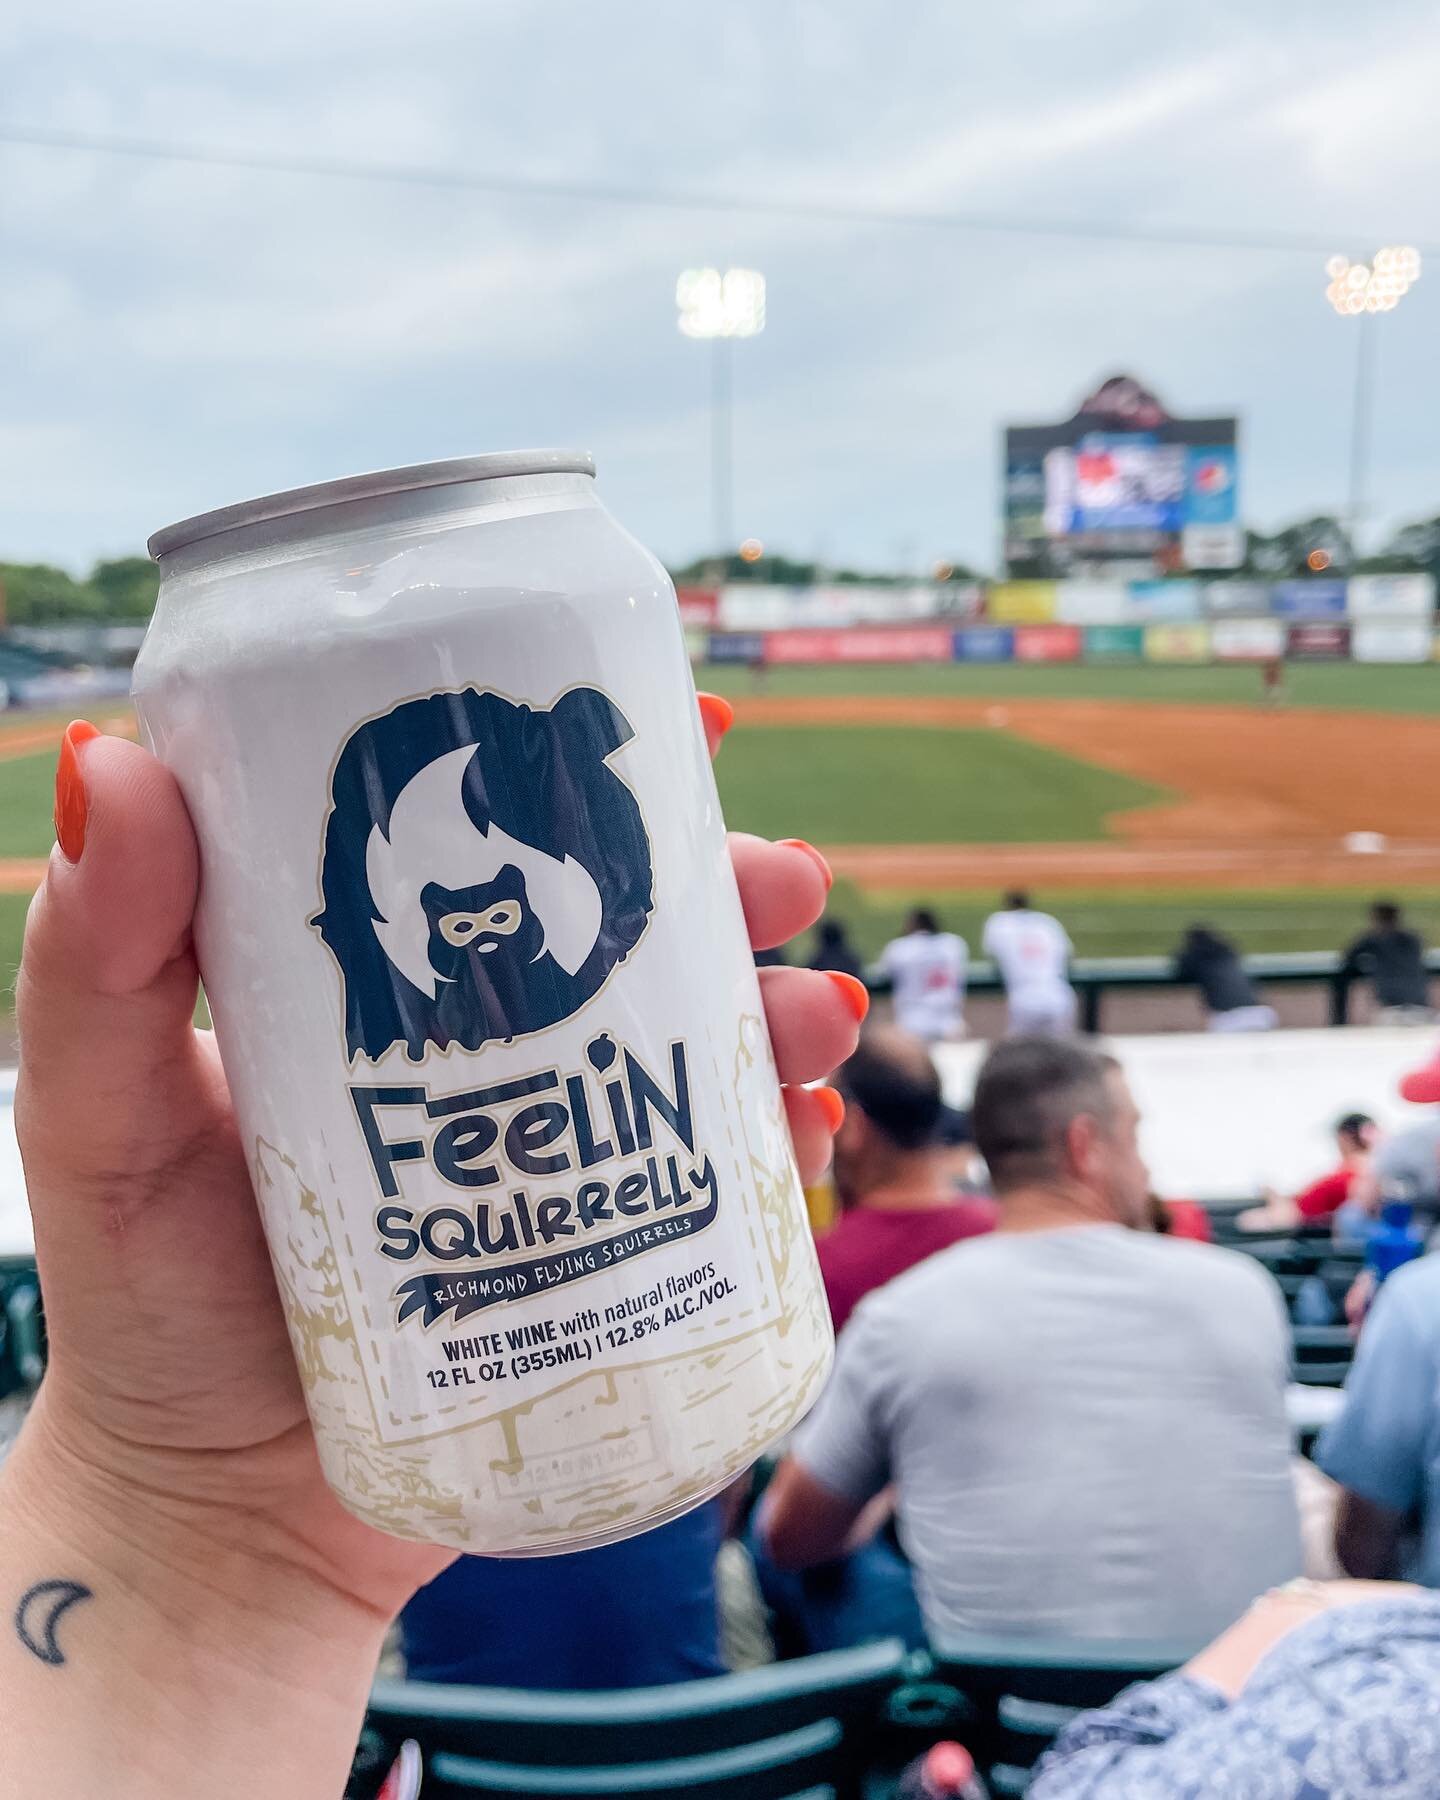 Did you know? Wednesday = &ldquo;Wine &amp; K-9s&rdquo; night at The Diamond ⚾️🍷🐶
⠀⠀⠀⠀⠀⠀⠀⠀⠀
Enjoy $5 glasses of wine at @gosquirrels games on Wednesdays from 5:30 - 7:30 pm, available at the wine cart located in the Funnville Fan Zone on the main c